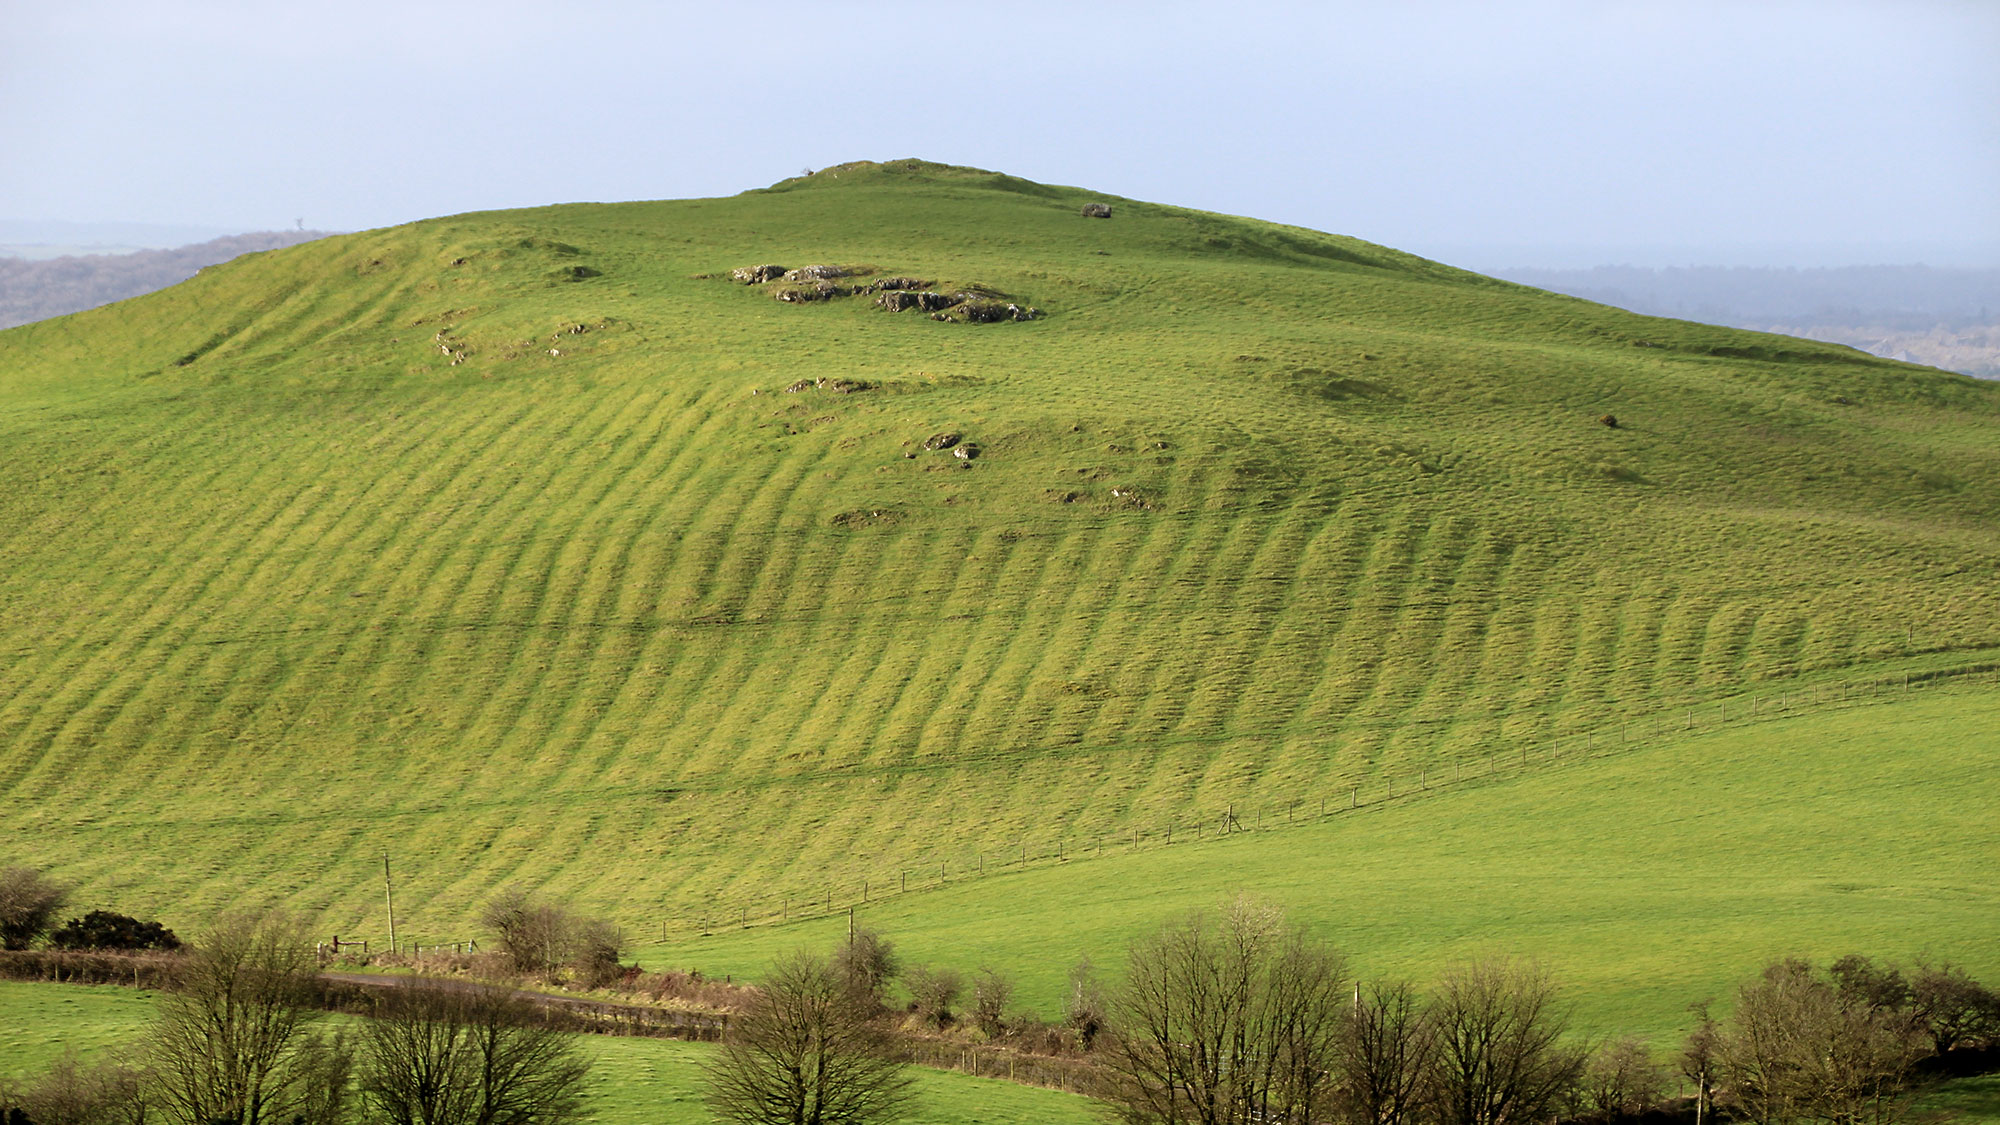 Sliabh na Cailleach, the Hill of the Witch, at Loughcrew in County Meath.